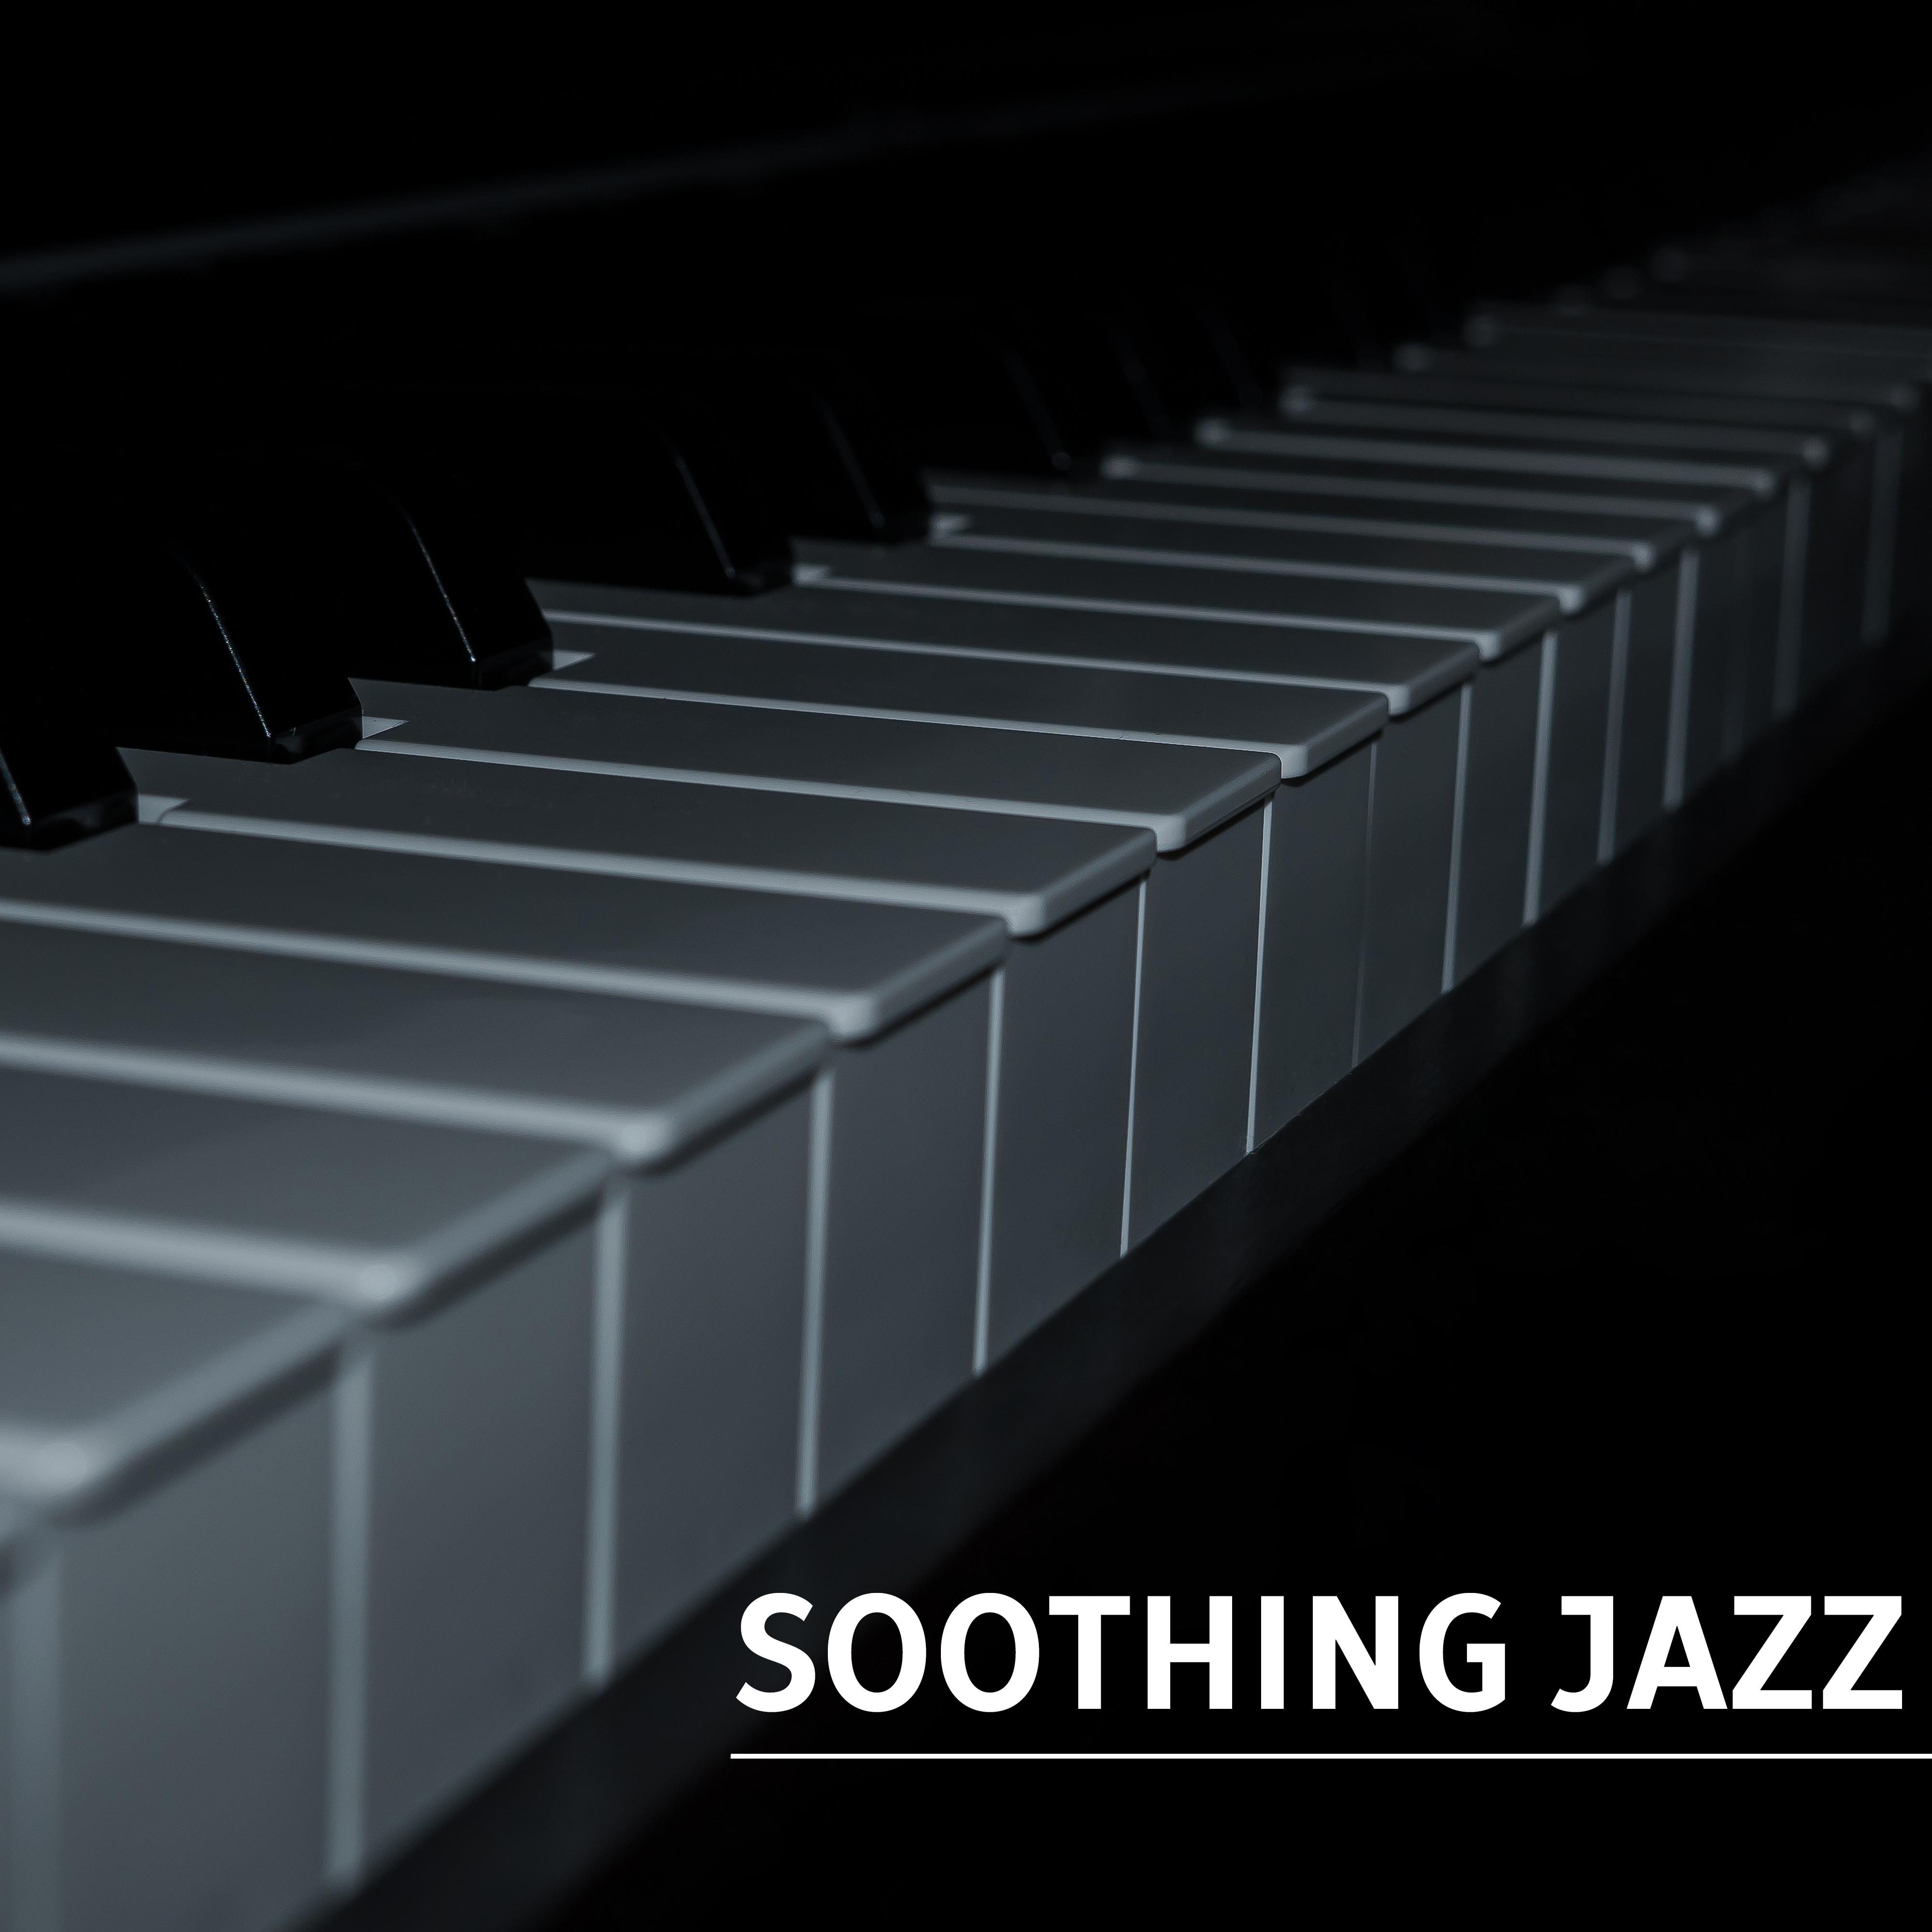 Soothing Jazz – Instrumental Music for Relaxation, Smooth Jazz, Easy Listening, Piano Jazz, Gentle Guitar, Chilled Jazz